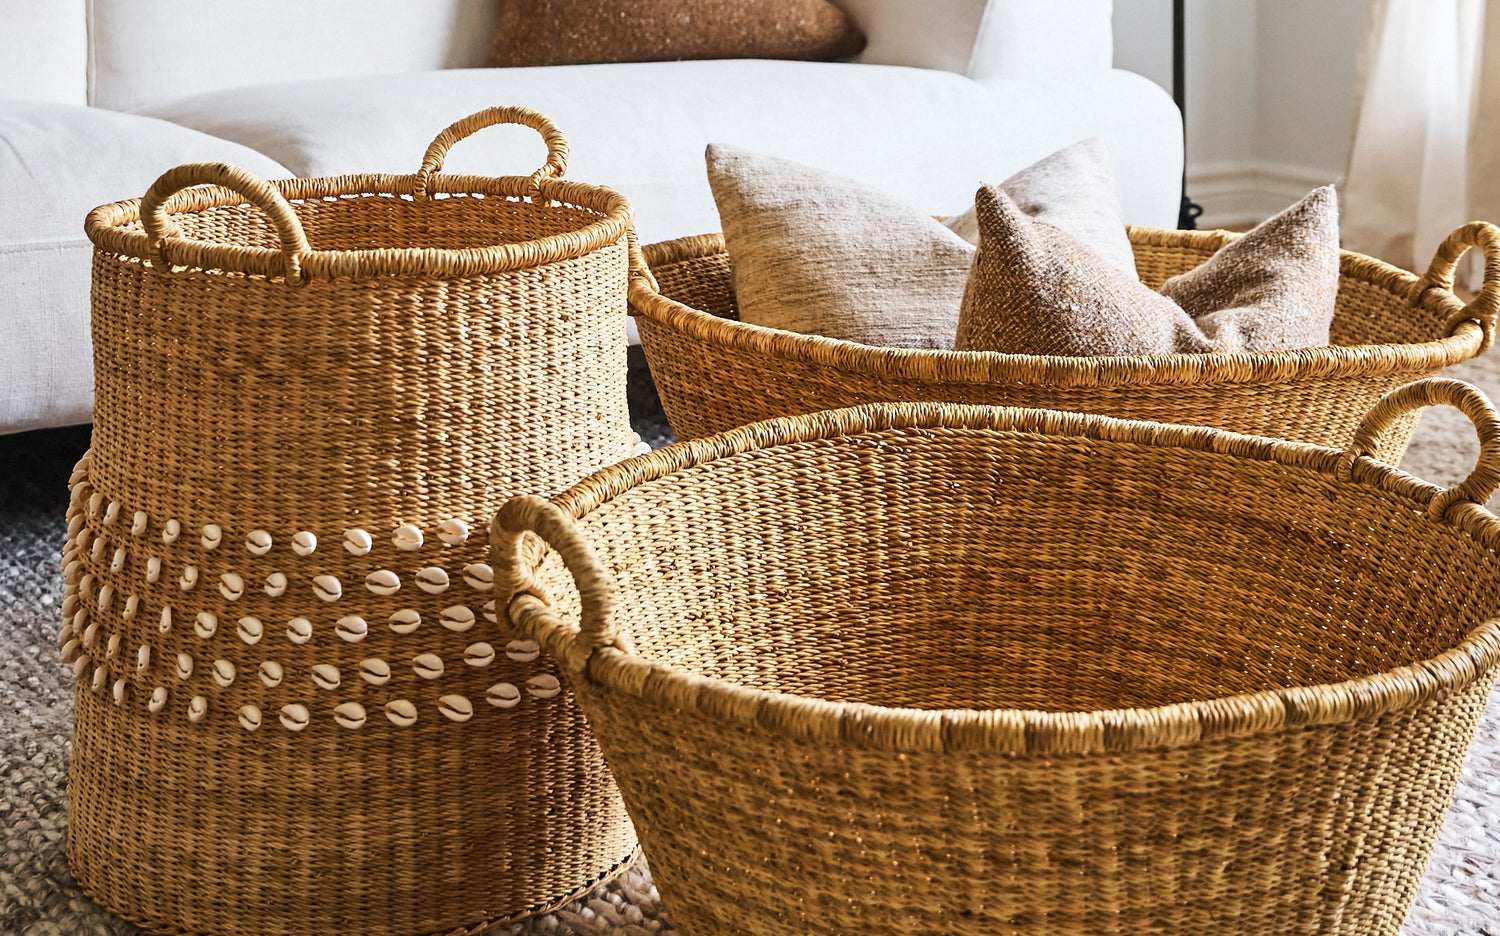 three woven baskets in a living room